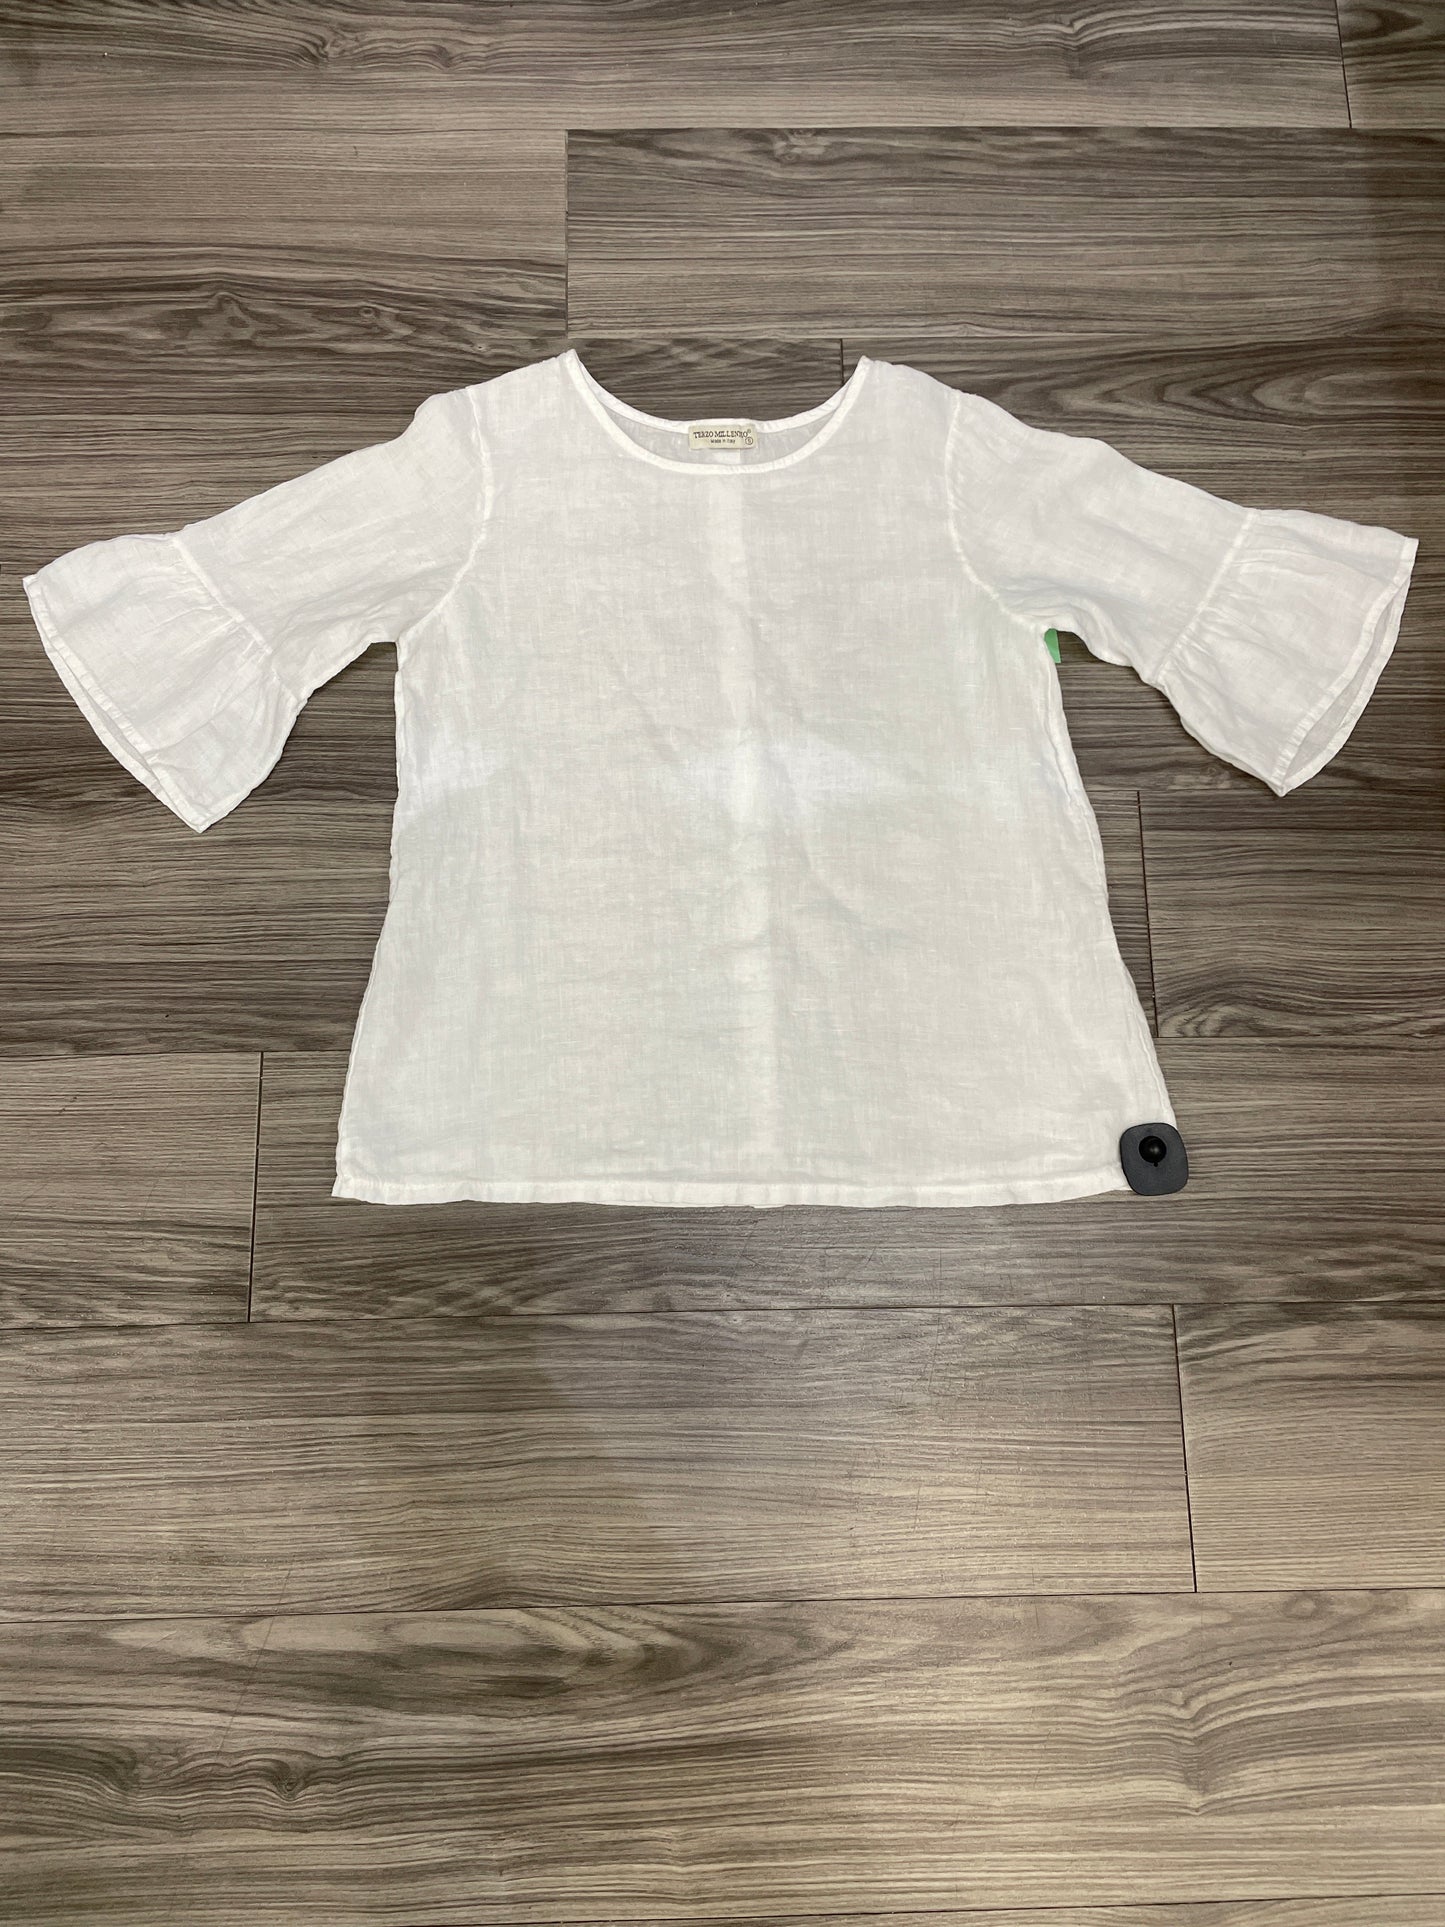 White Top 3/4 Sleeve Clothes Mentor, Size S